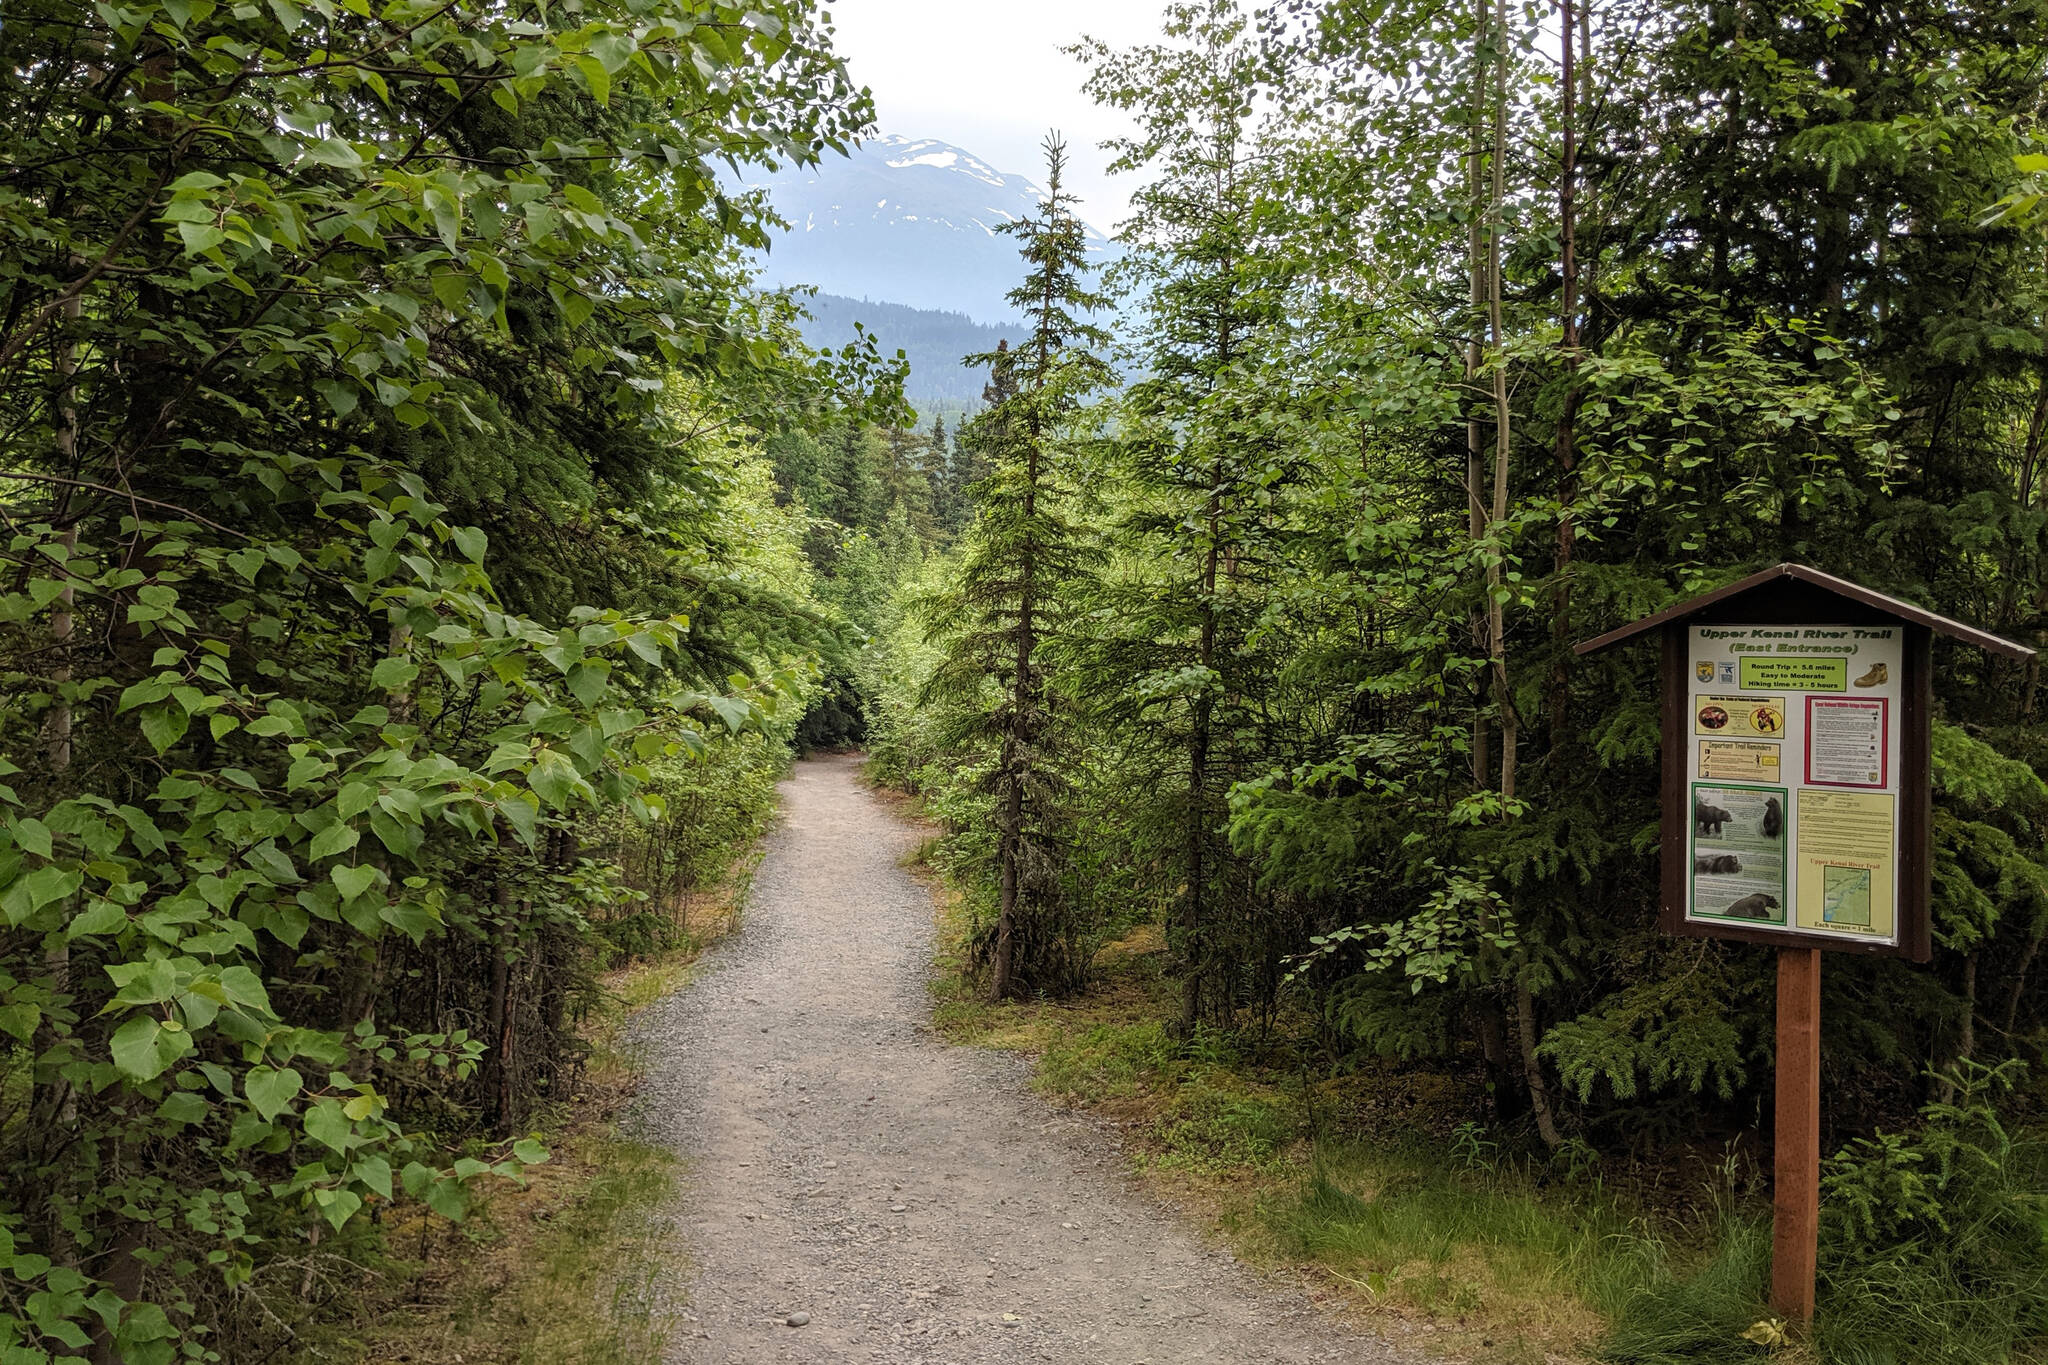 The east entrance of the Upper Kenai River Trail is photographed on Sunday, June 23, 2019, in the Kenai National Wildlife Refuge, Alaska. (Photo by Erin Thompson/Peninsula Clarion)